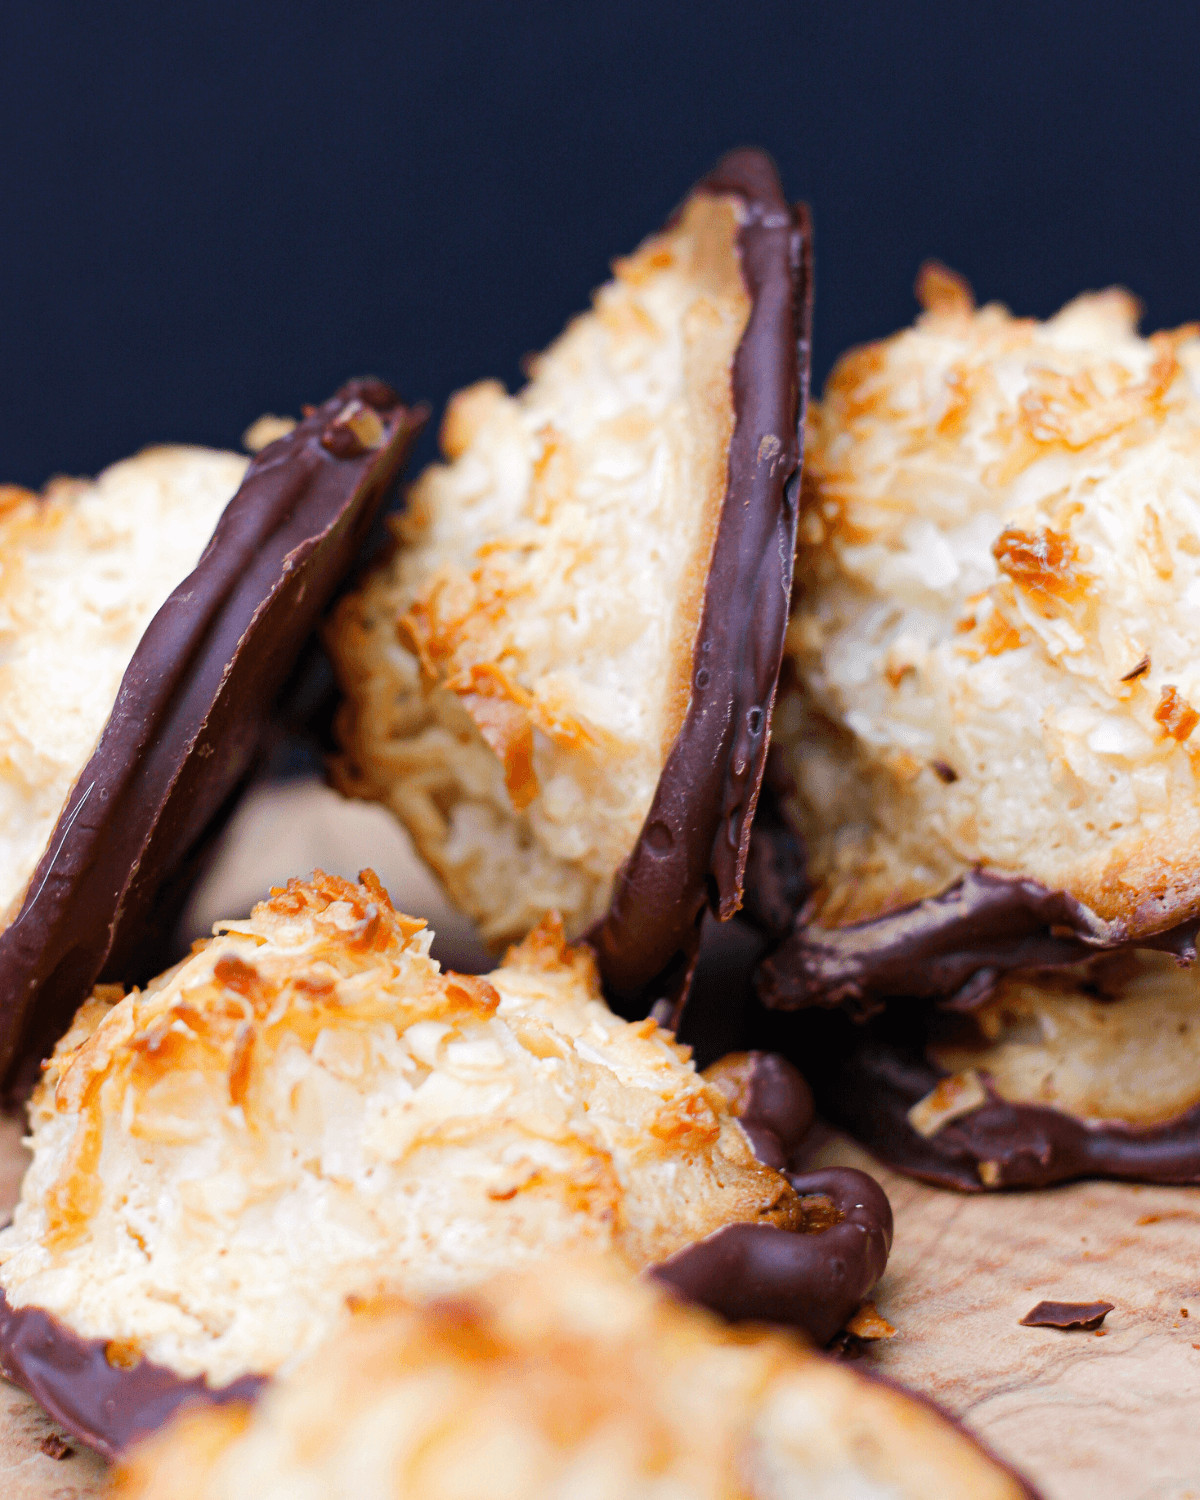 Coconut almond macaroons on a tray.